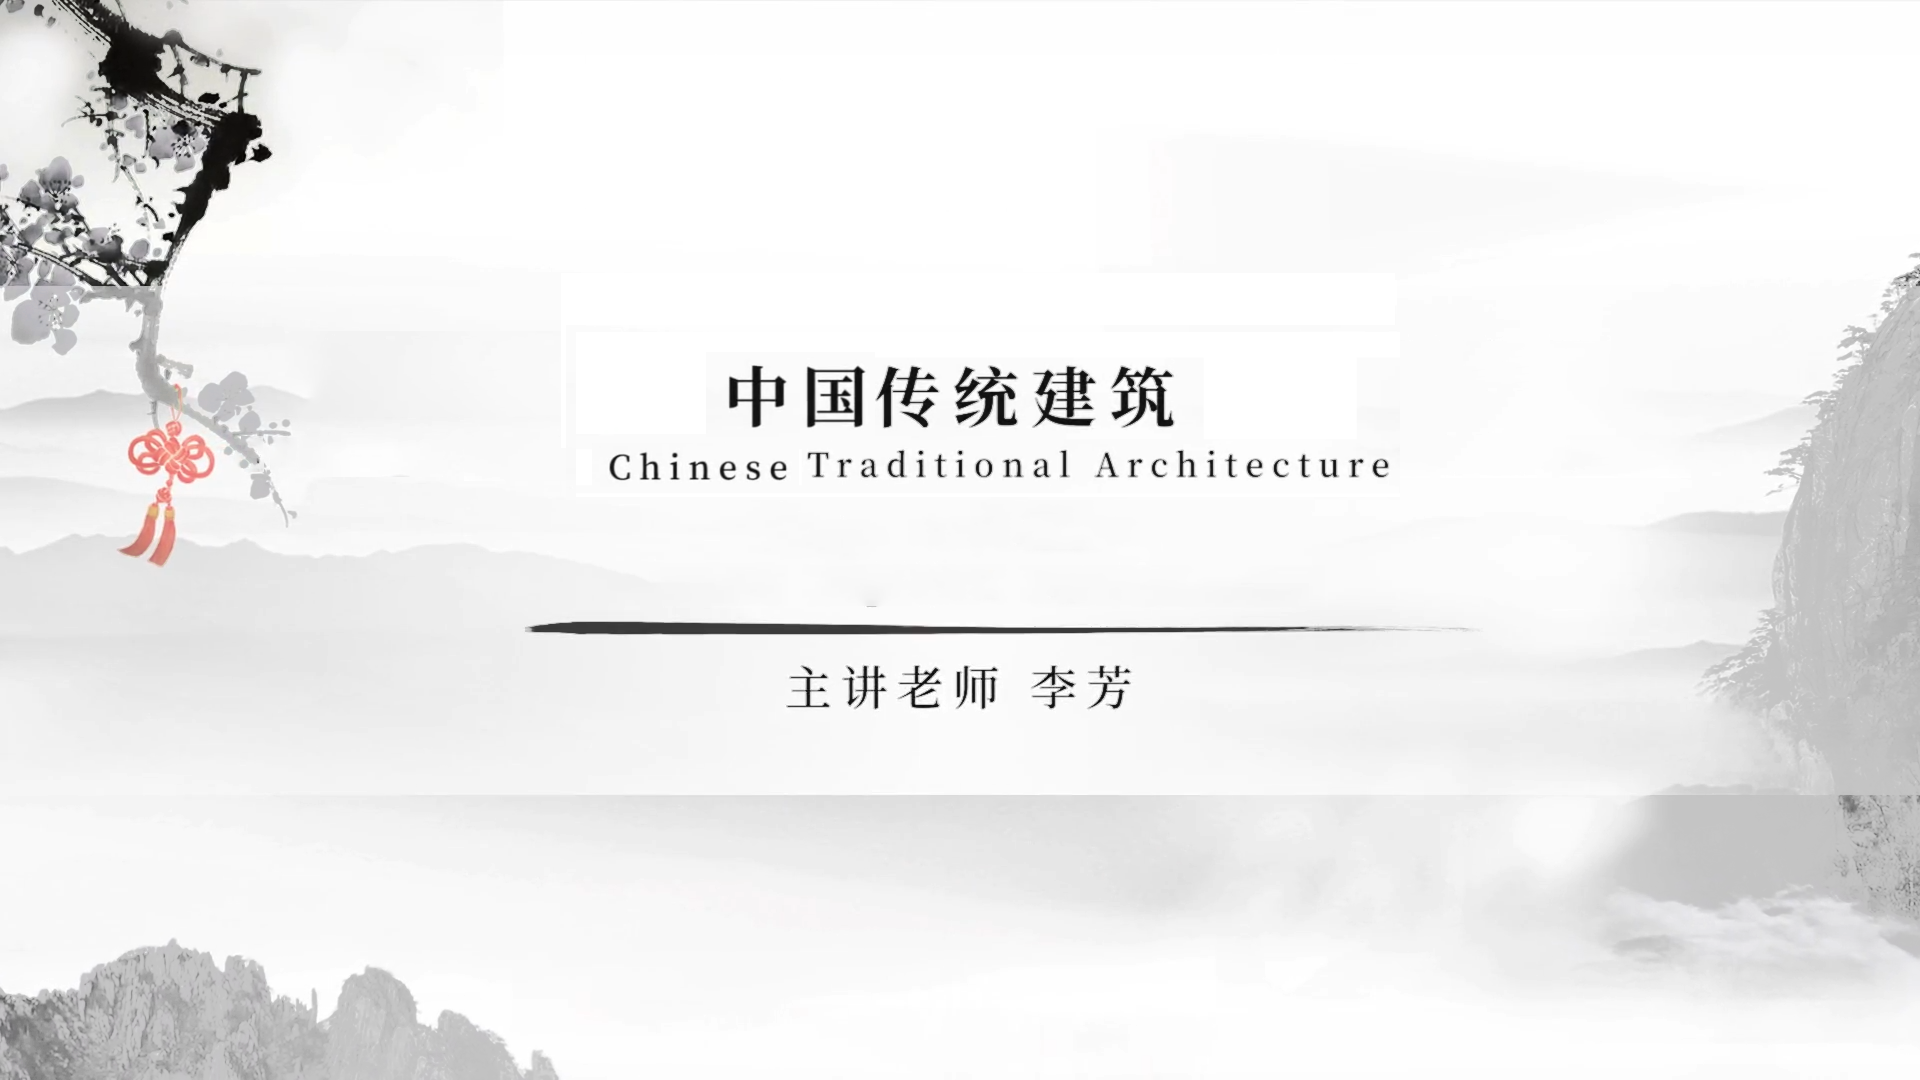 Chinese traditional Architecture